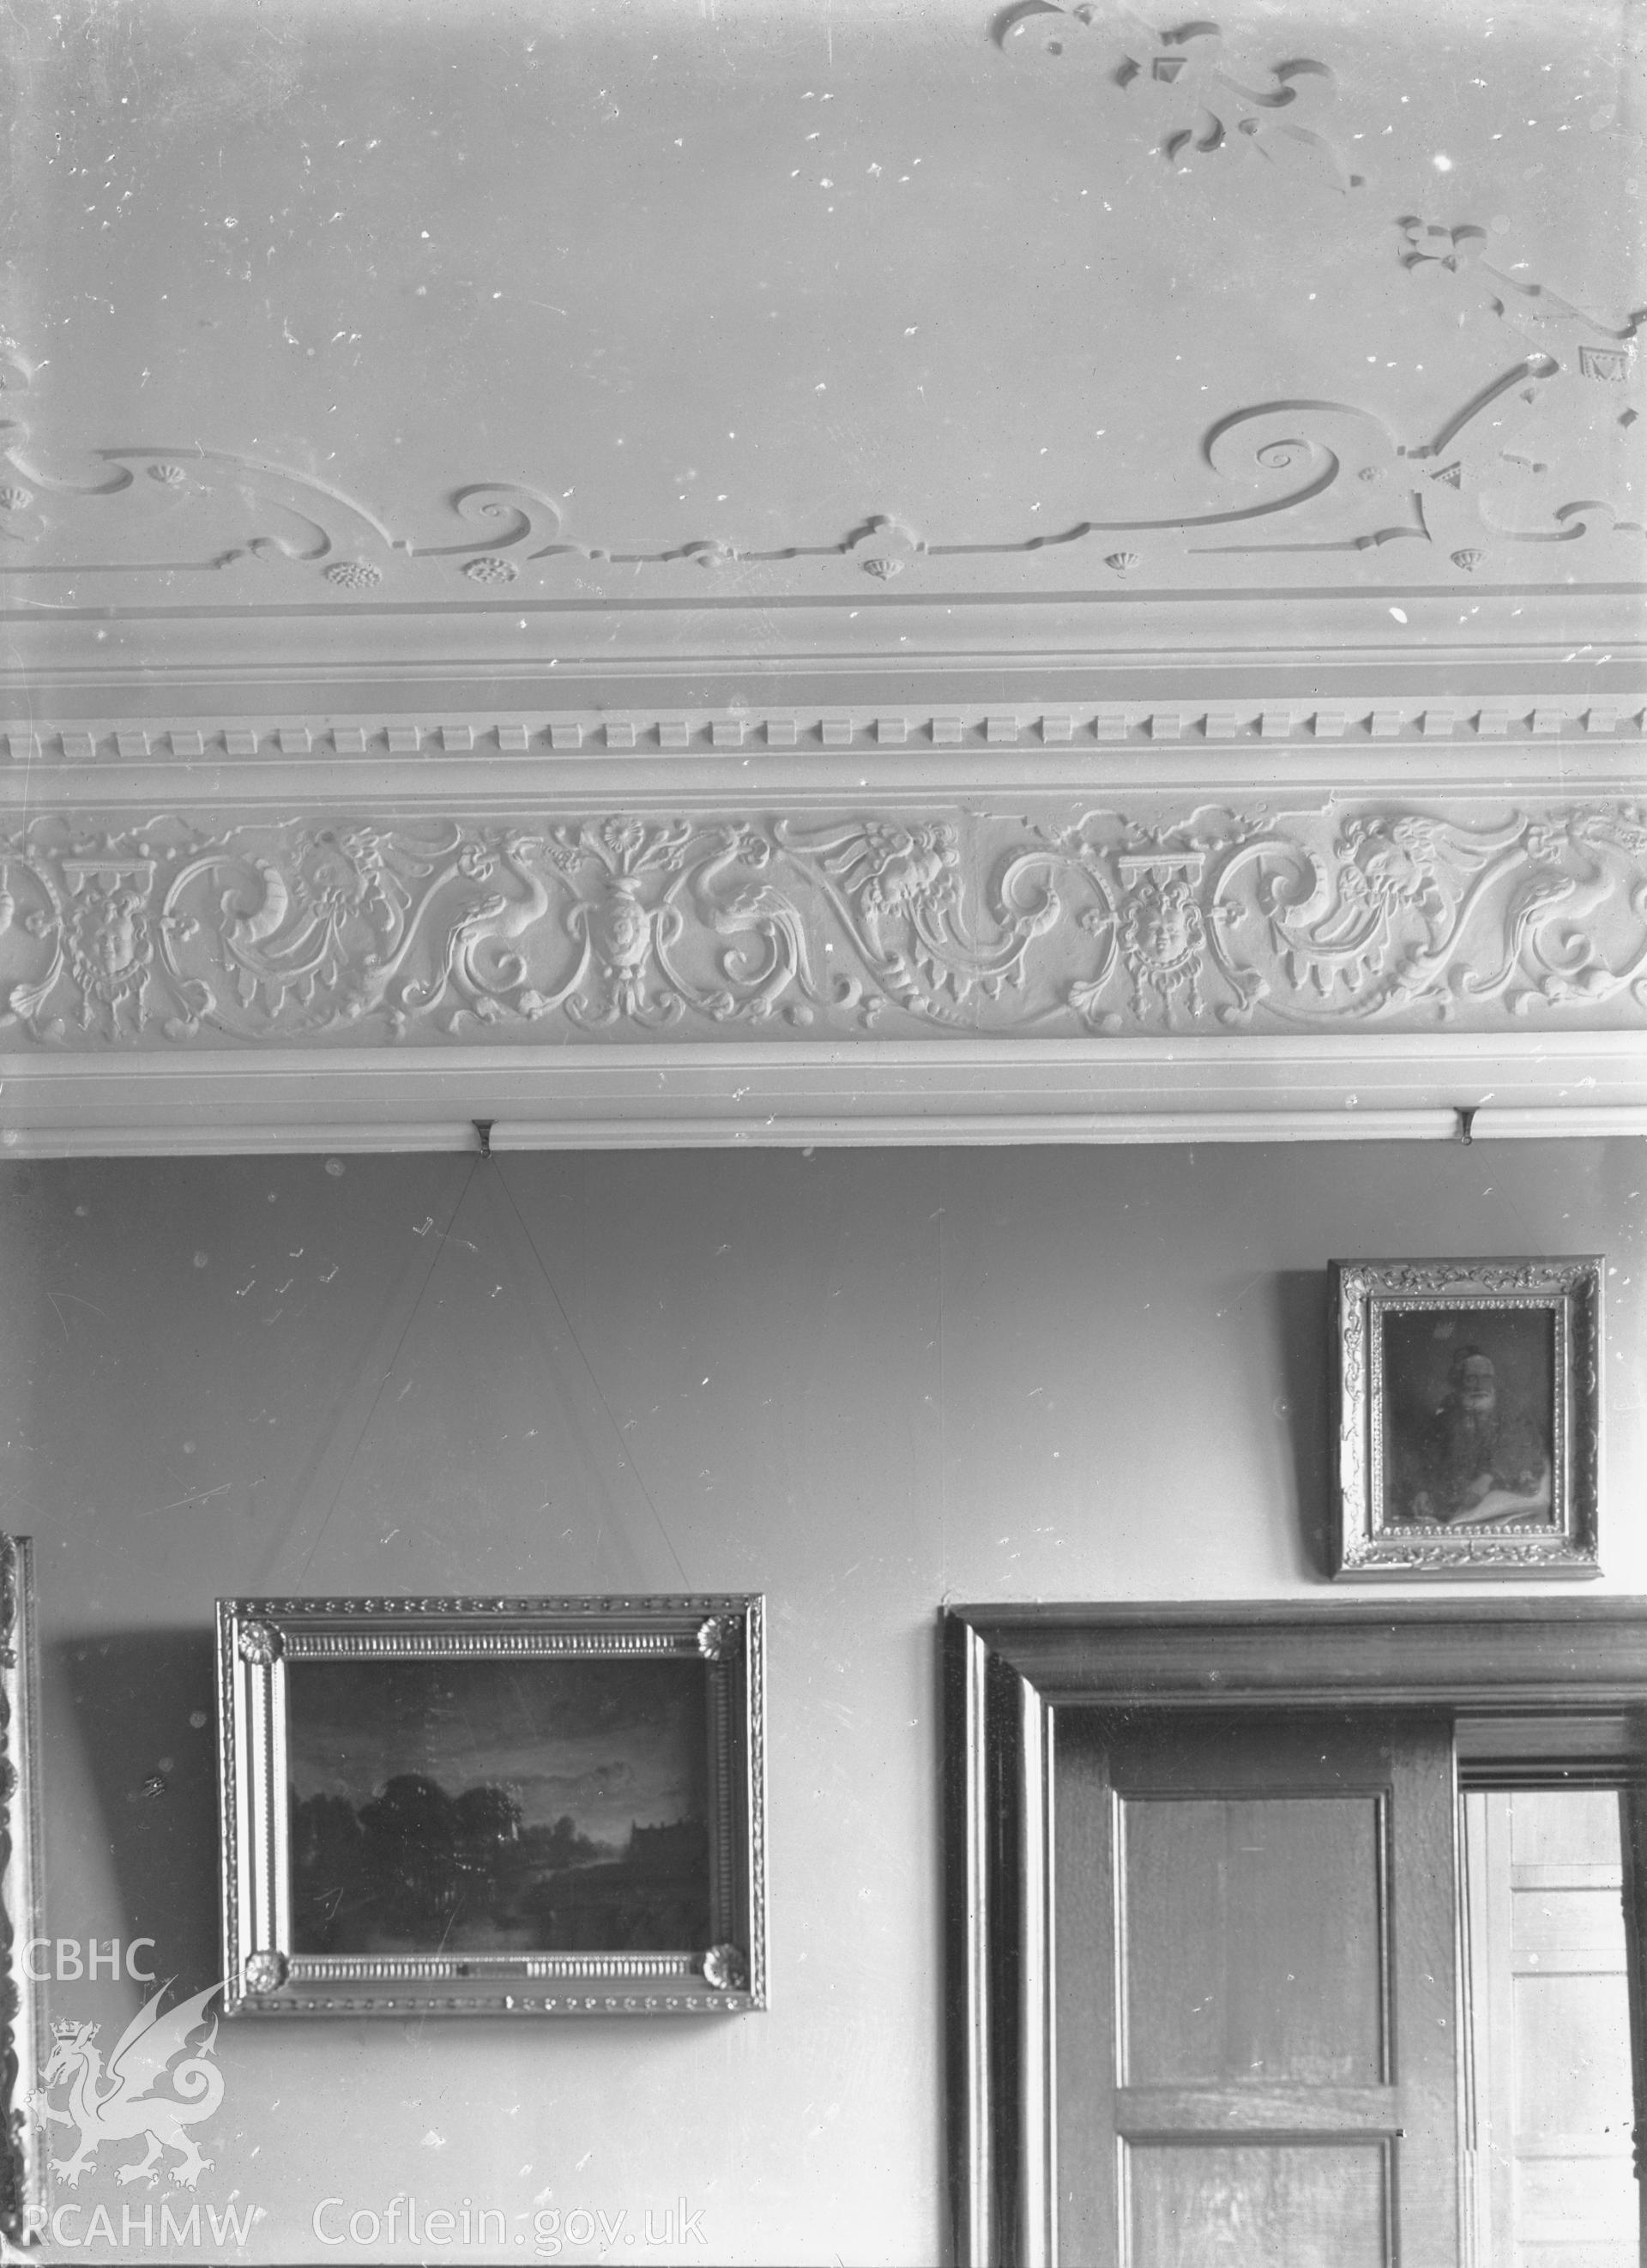 Black and white glass negative showing decorative plasterwork on the ceiling of unidentified house.